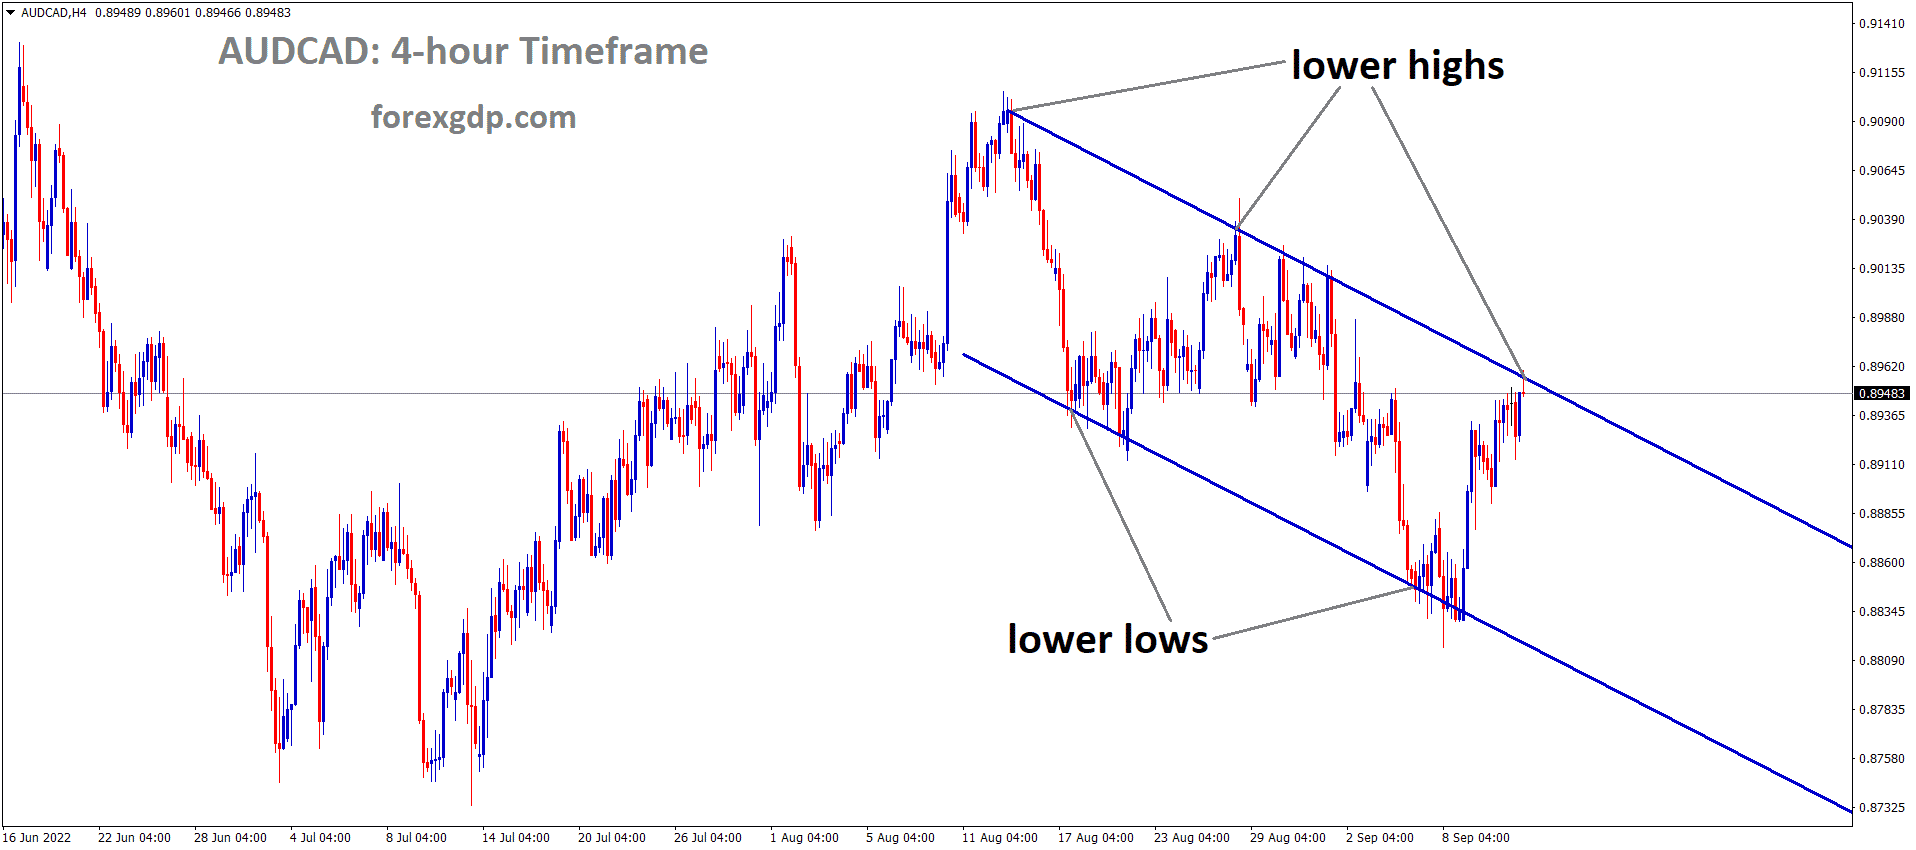 AUDCAD is moving in the Descending channel and the market has reached the lower high area of the channel